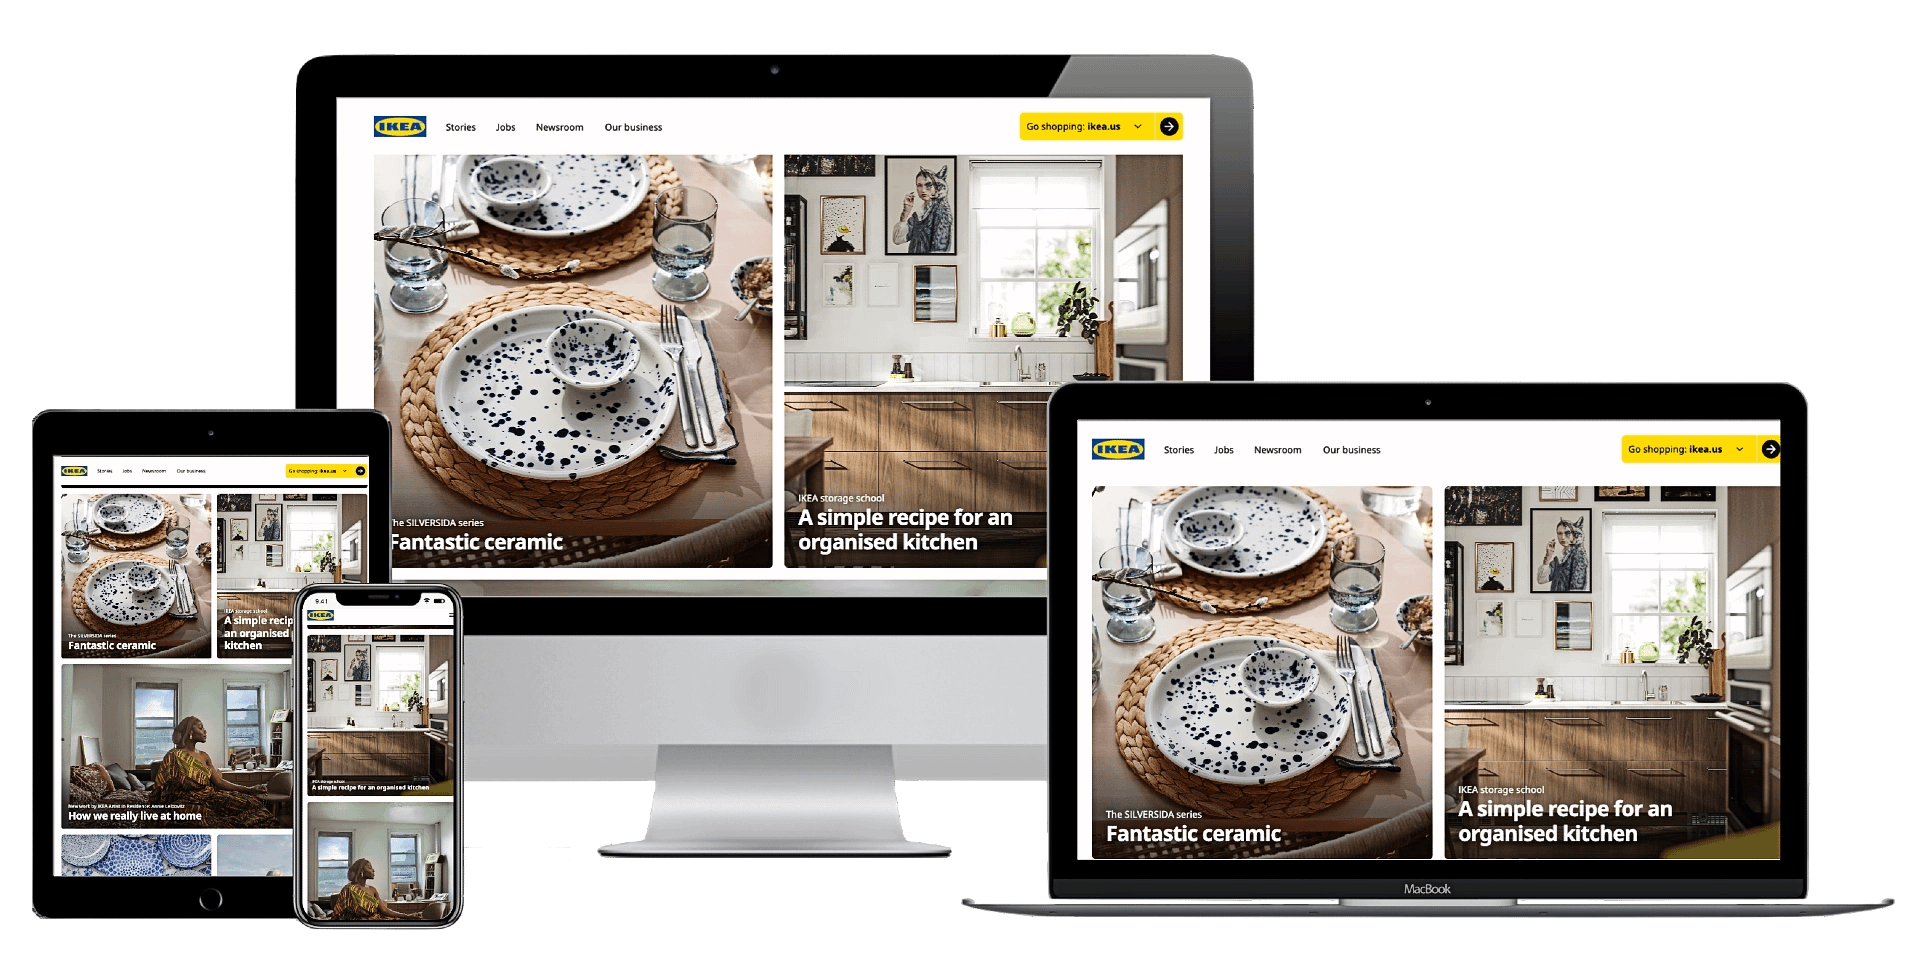 IKEA uses a responsive tile layout on their homepage.